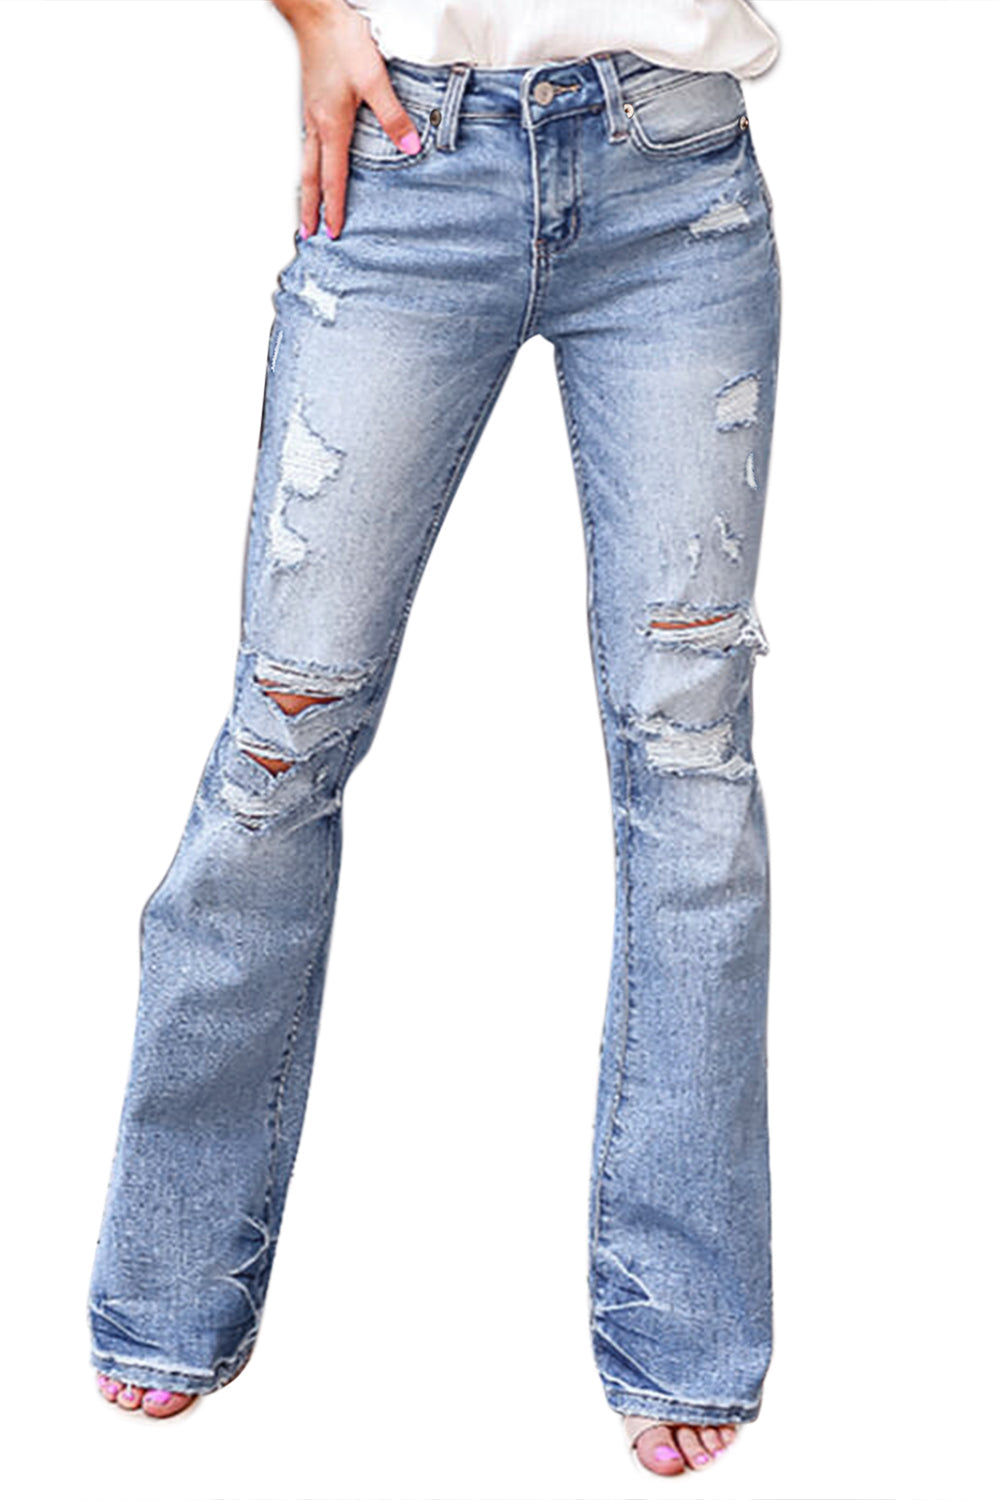 Sky Blue Distressed Mid Waist Ripped Flare Jeans